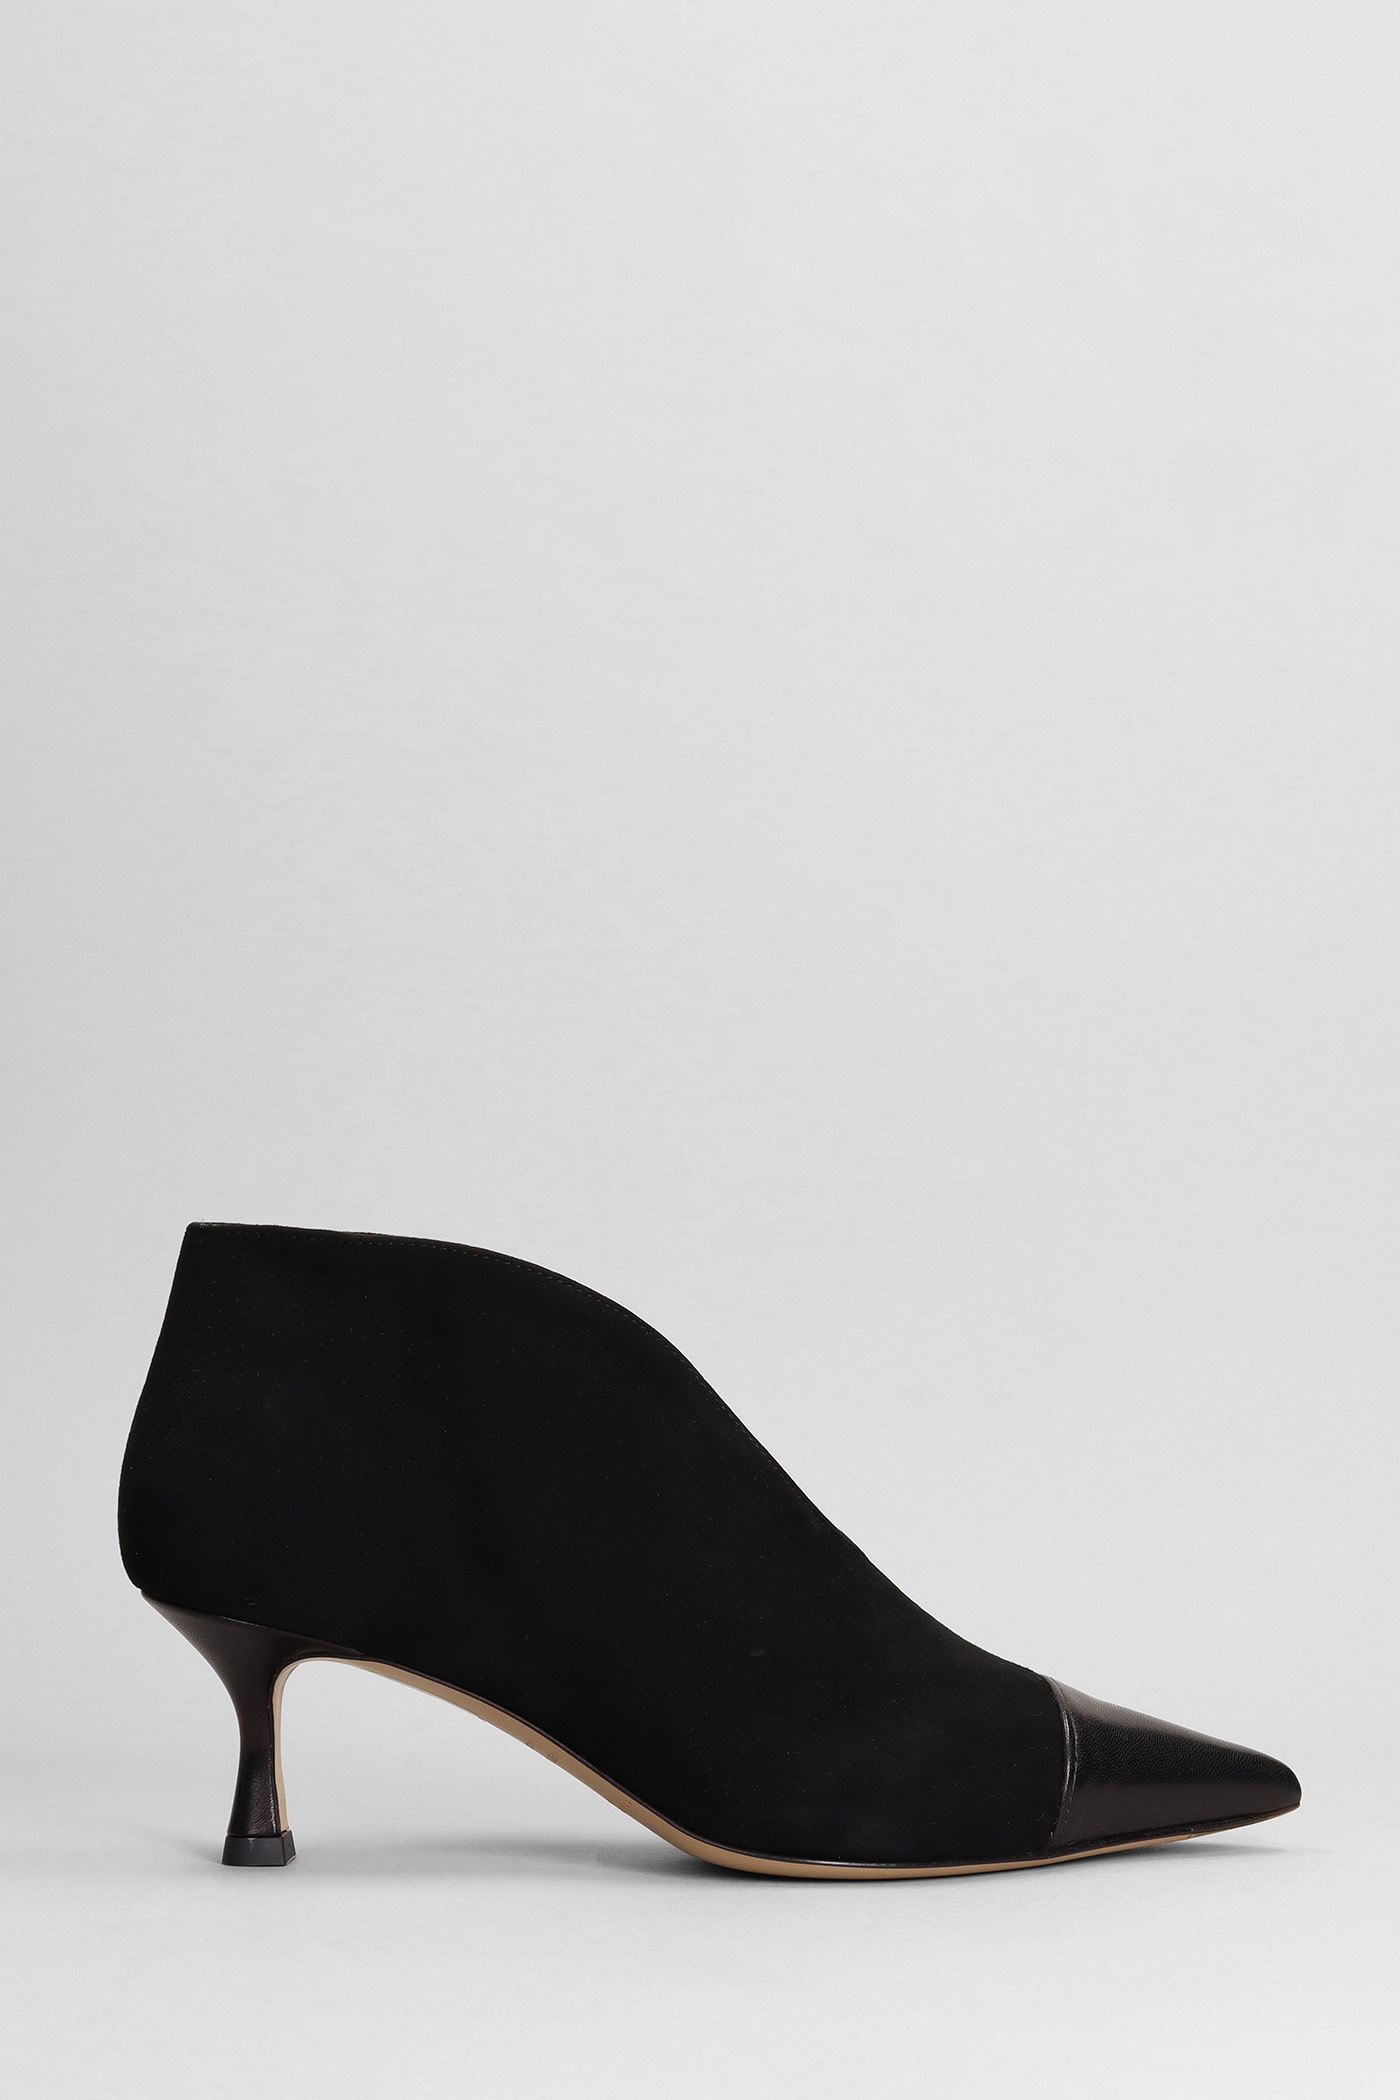 Roberto Festa Joelle High Heels Ankle Boots In Black Suede And Leather